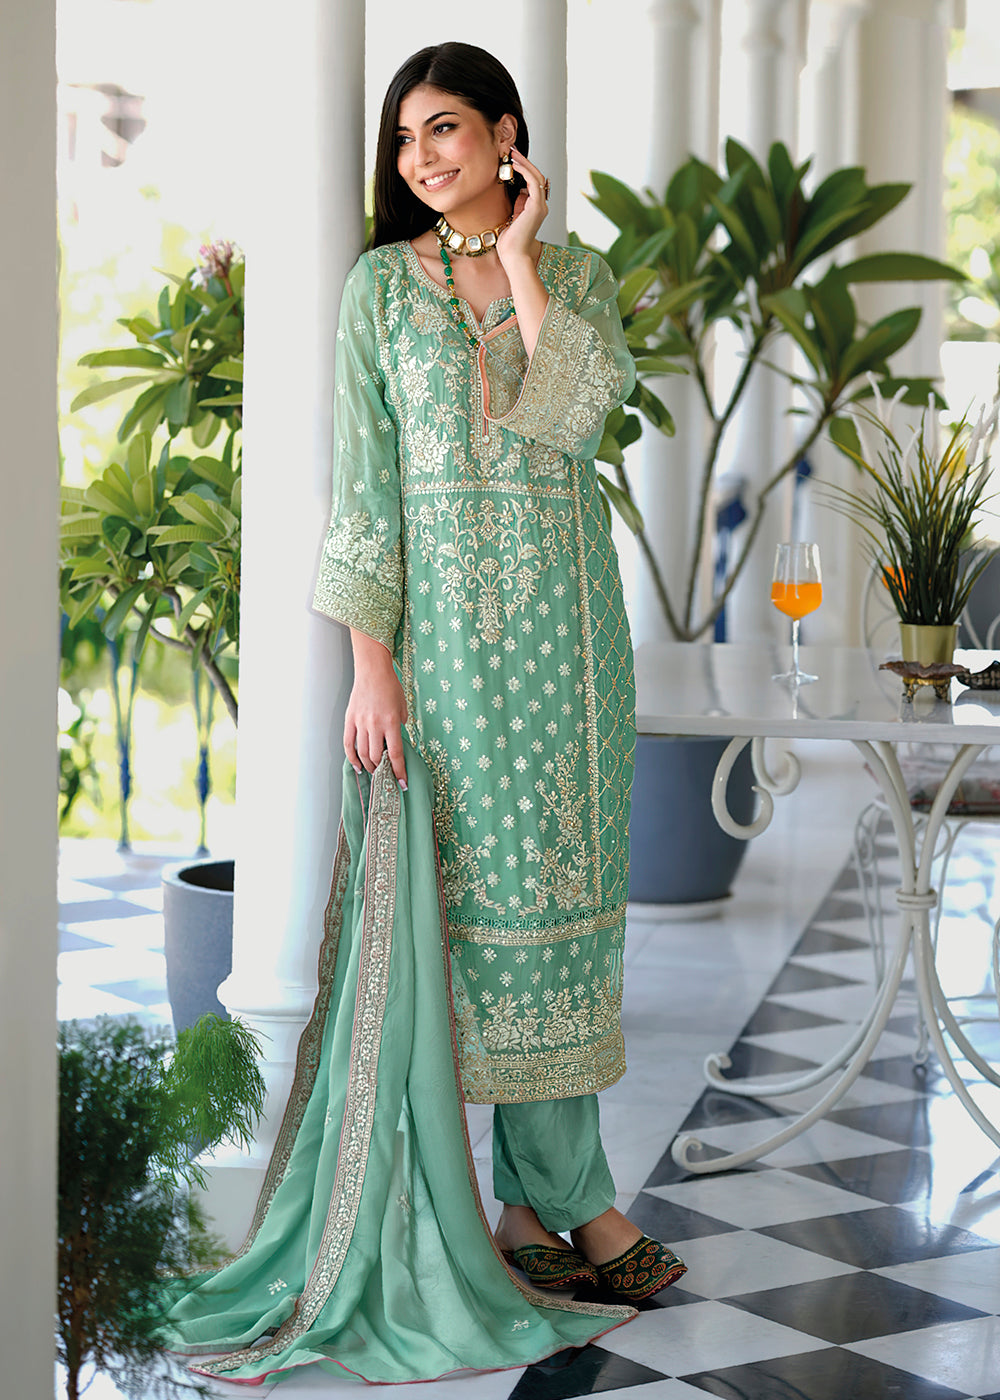 Buy Now Aqua Green Soft Organza Embroidered Pant Style Salwar Suit Online in USA, UK, Canada, Germany, Australia & Worldwide at Empress Clothing.